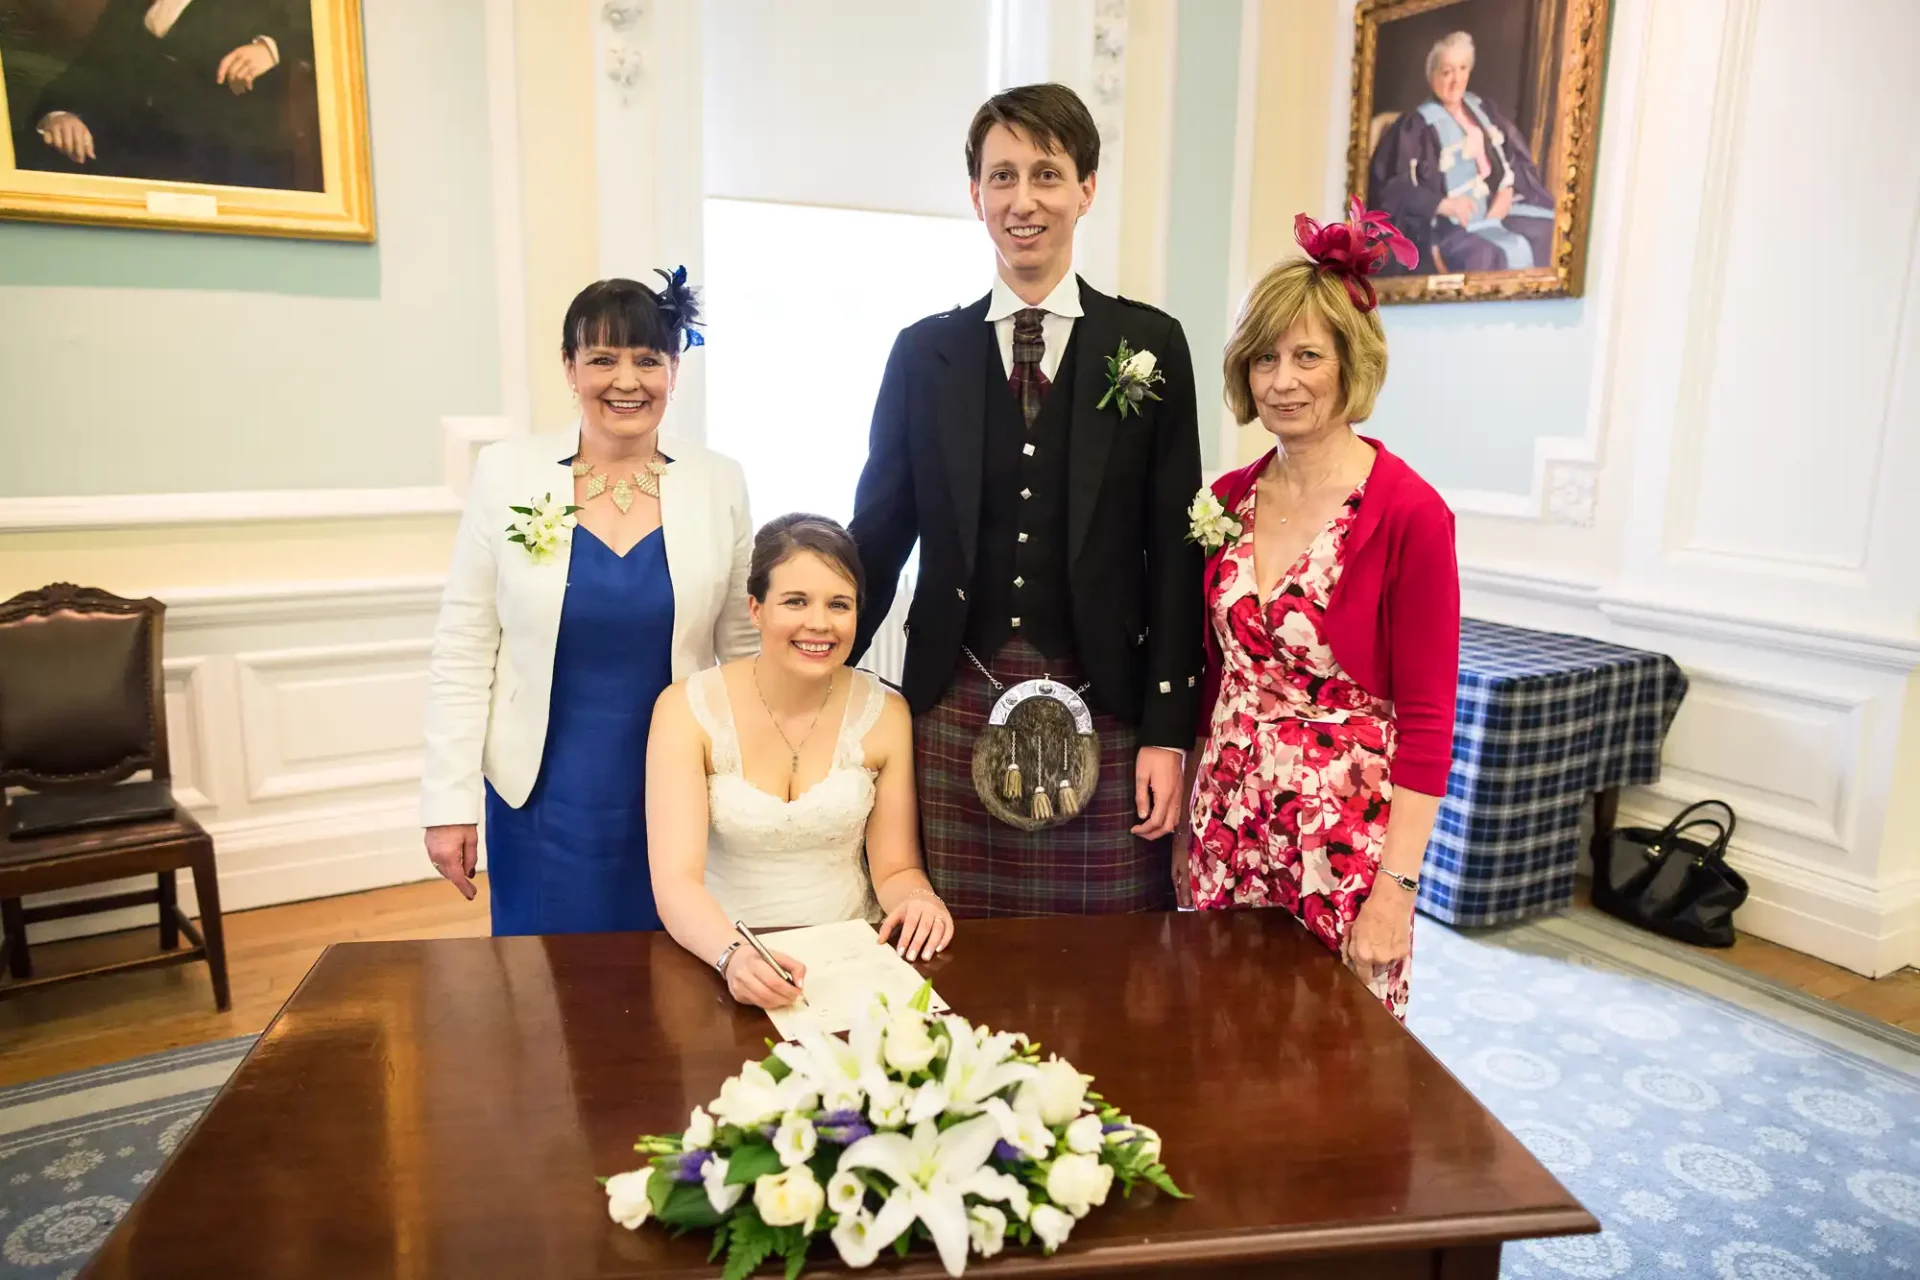 A bride seated at a table signing a document, flanked by a groom in a kilt and two smiling women in dresses, in an elegant room with portraits hanging.